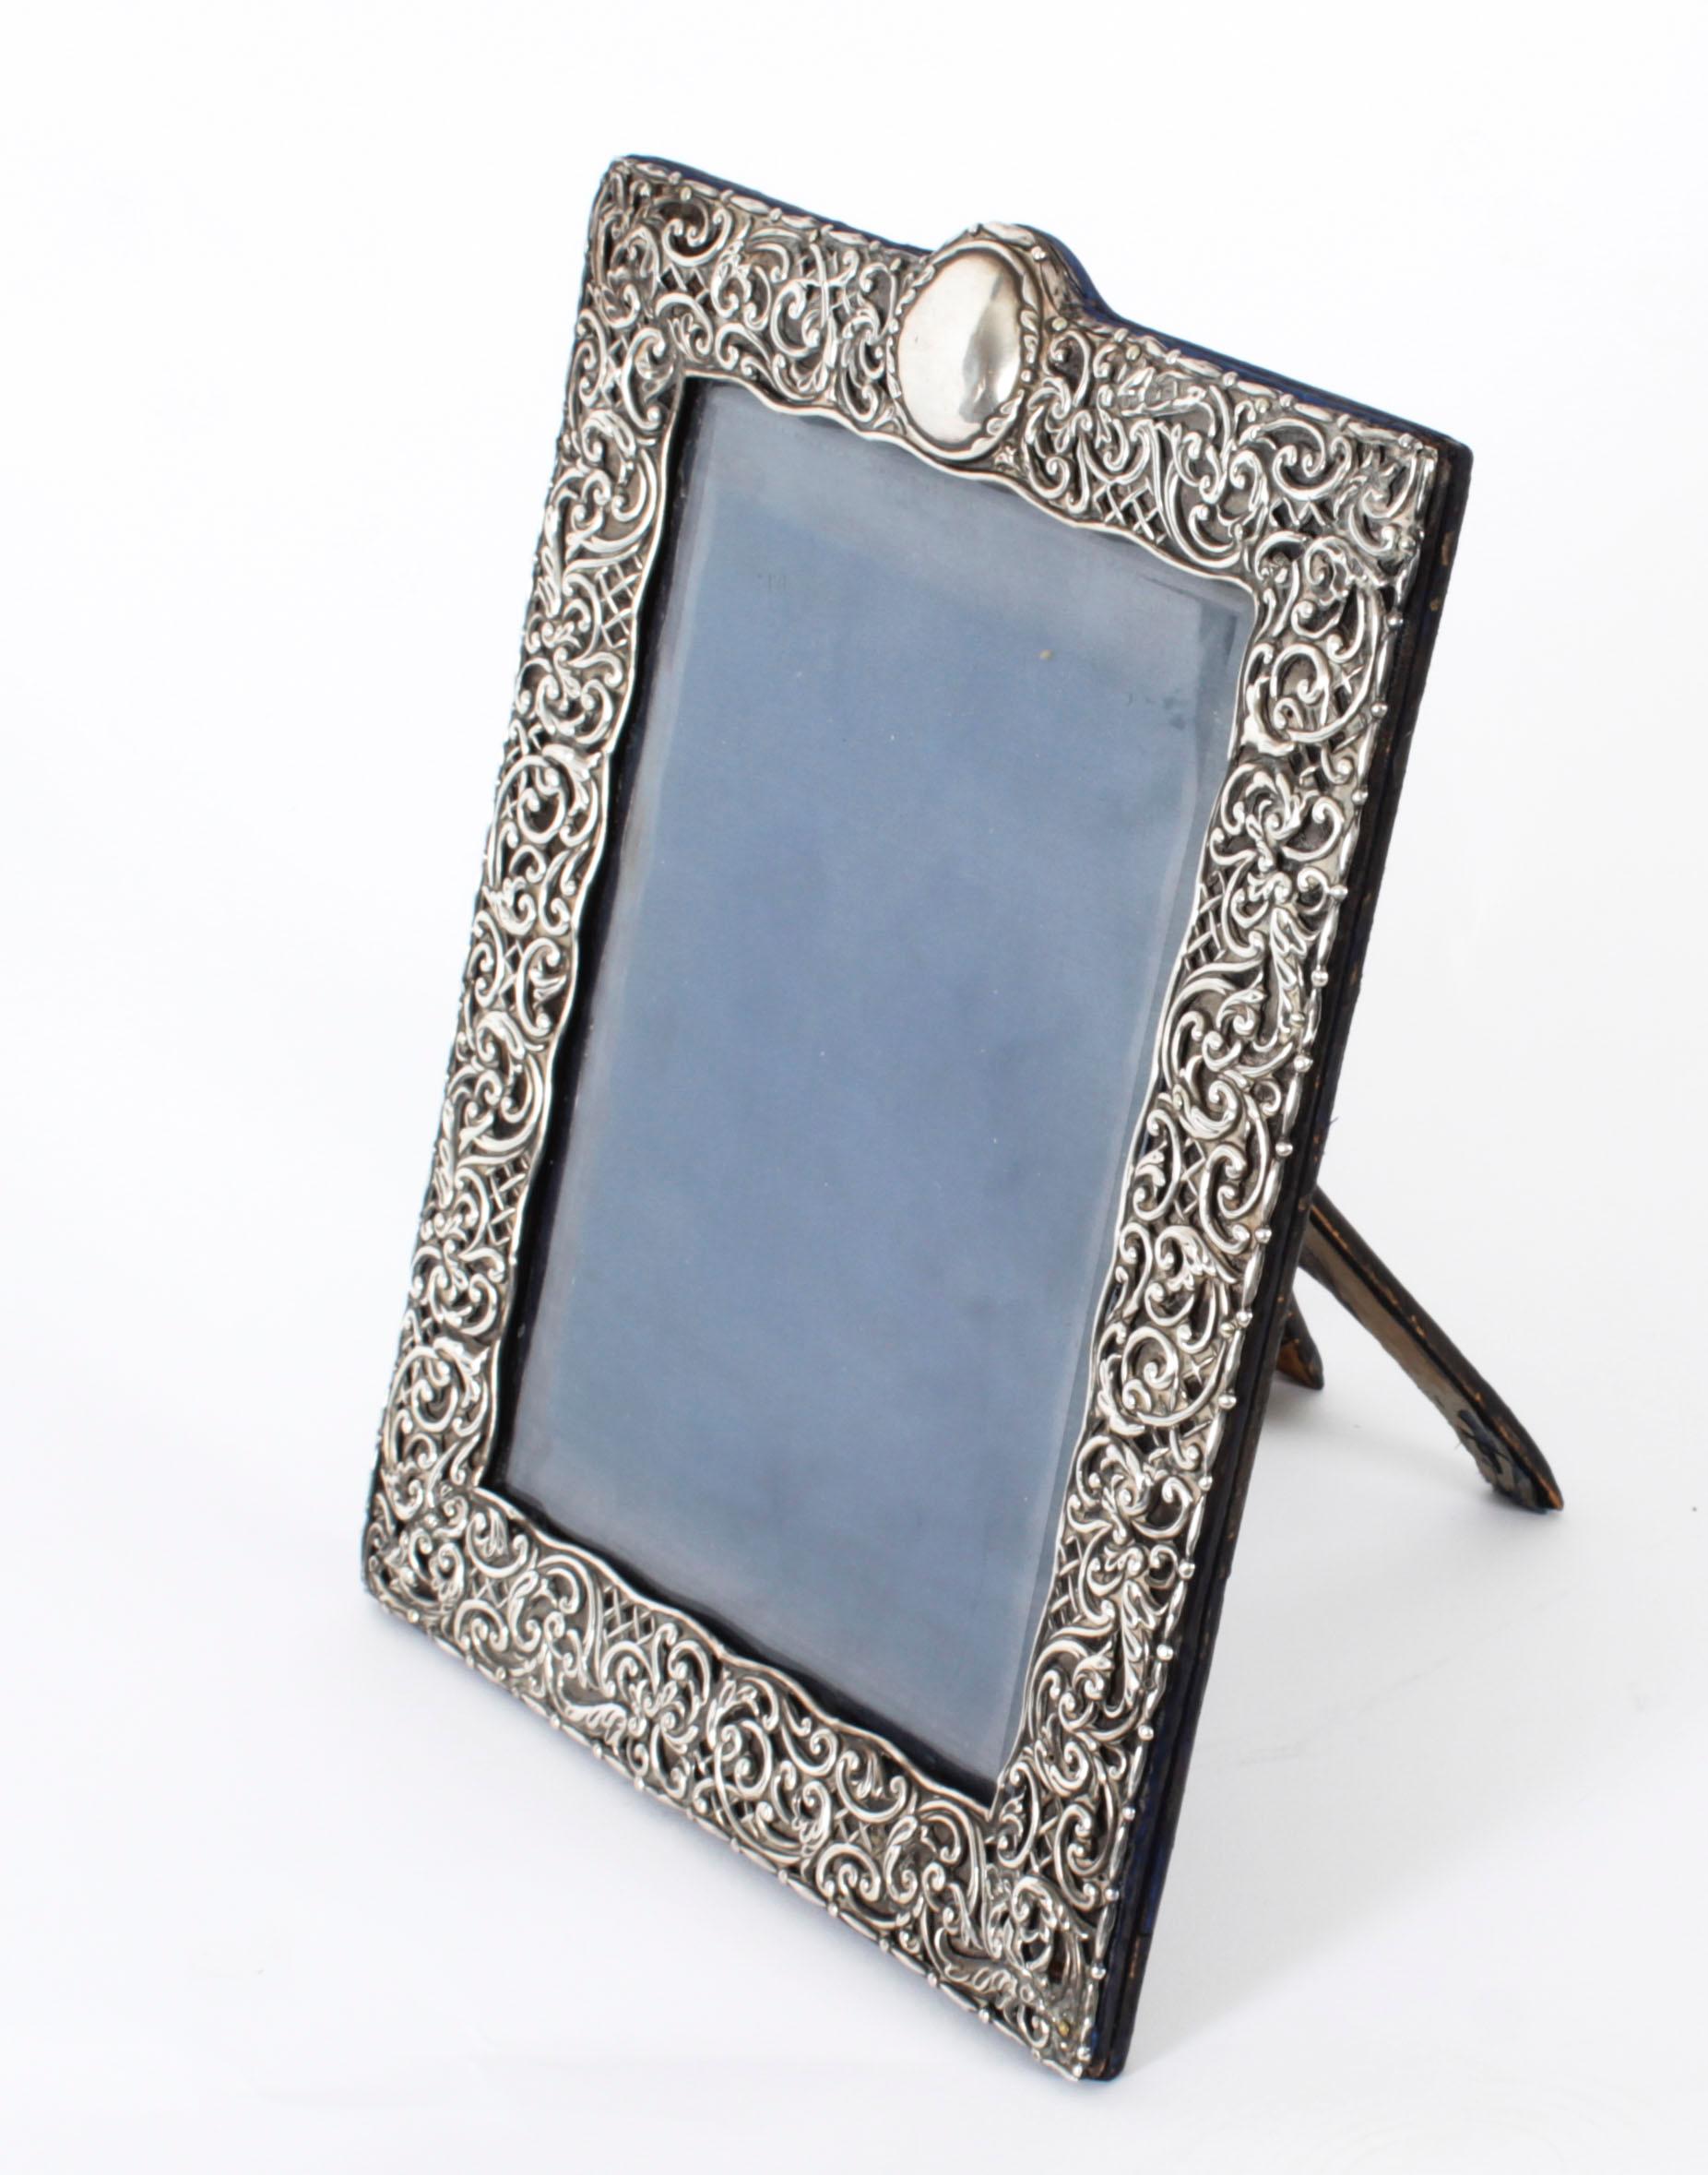 A truly superb antique Edwardian decorative sterling silver photograph frame the die stamped mount with C-scrolls and trellis, by Henry Matthews, Birmingham 1902.
 
Beautifully portrait frame decorated with relief floral, foliate and scroll